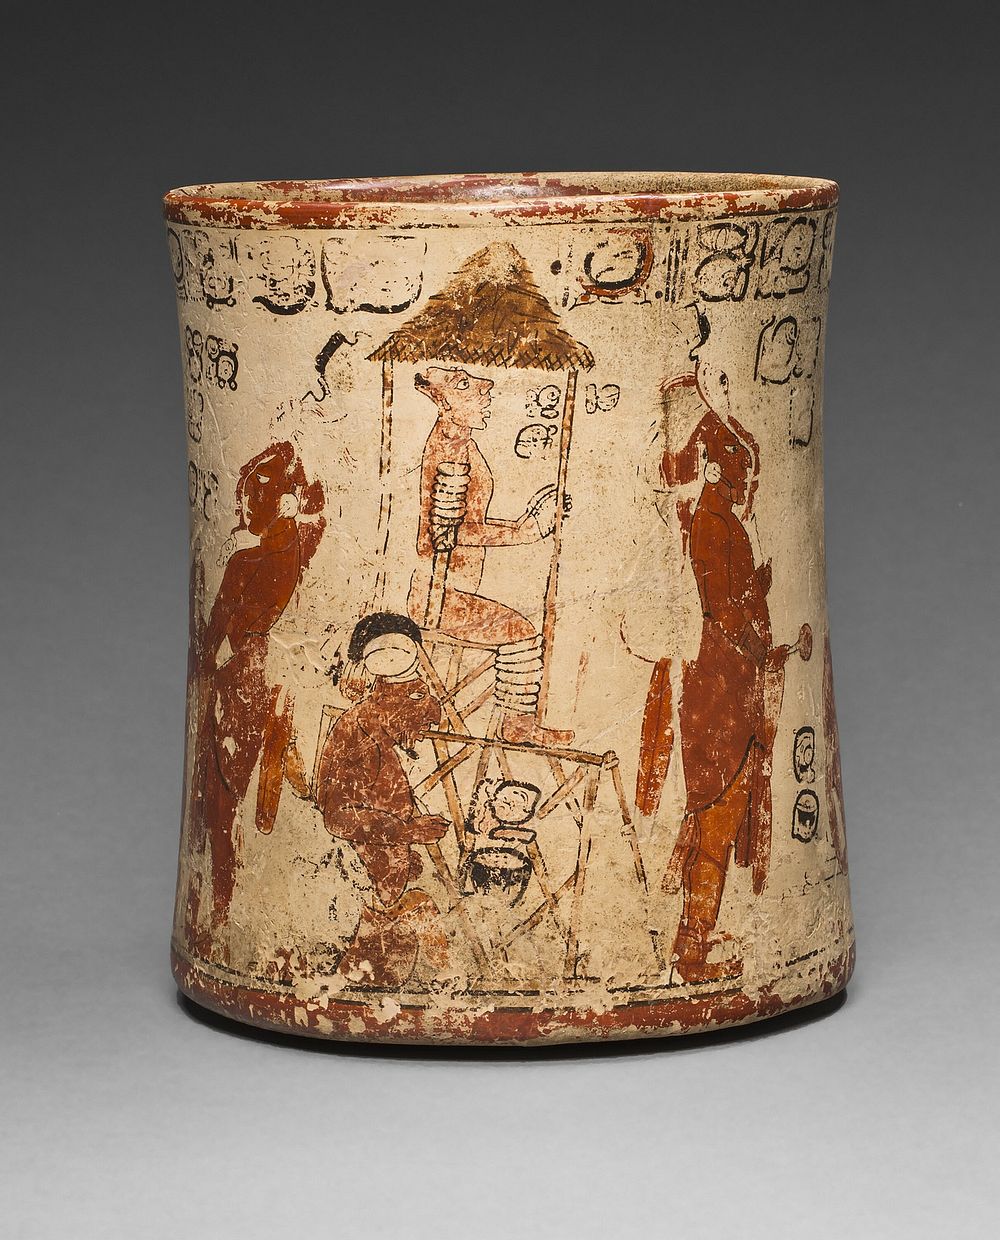 Vessel Depicting a Sacrificial Ceremony for a Royal Accession by Maya